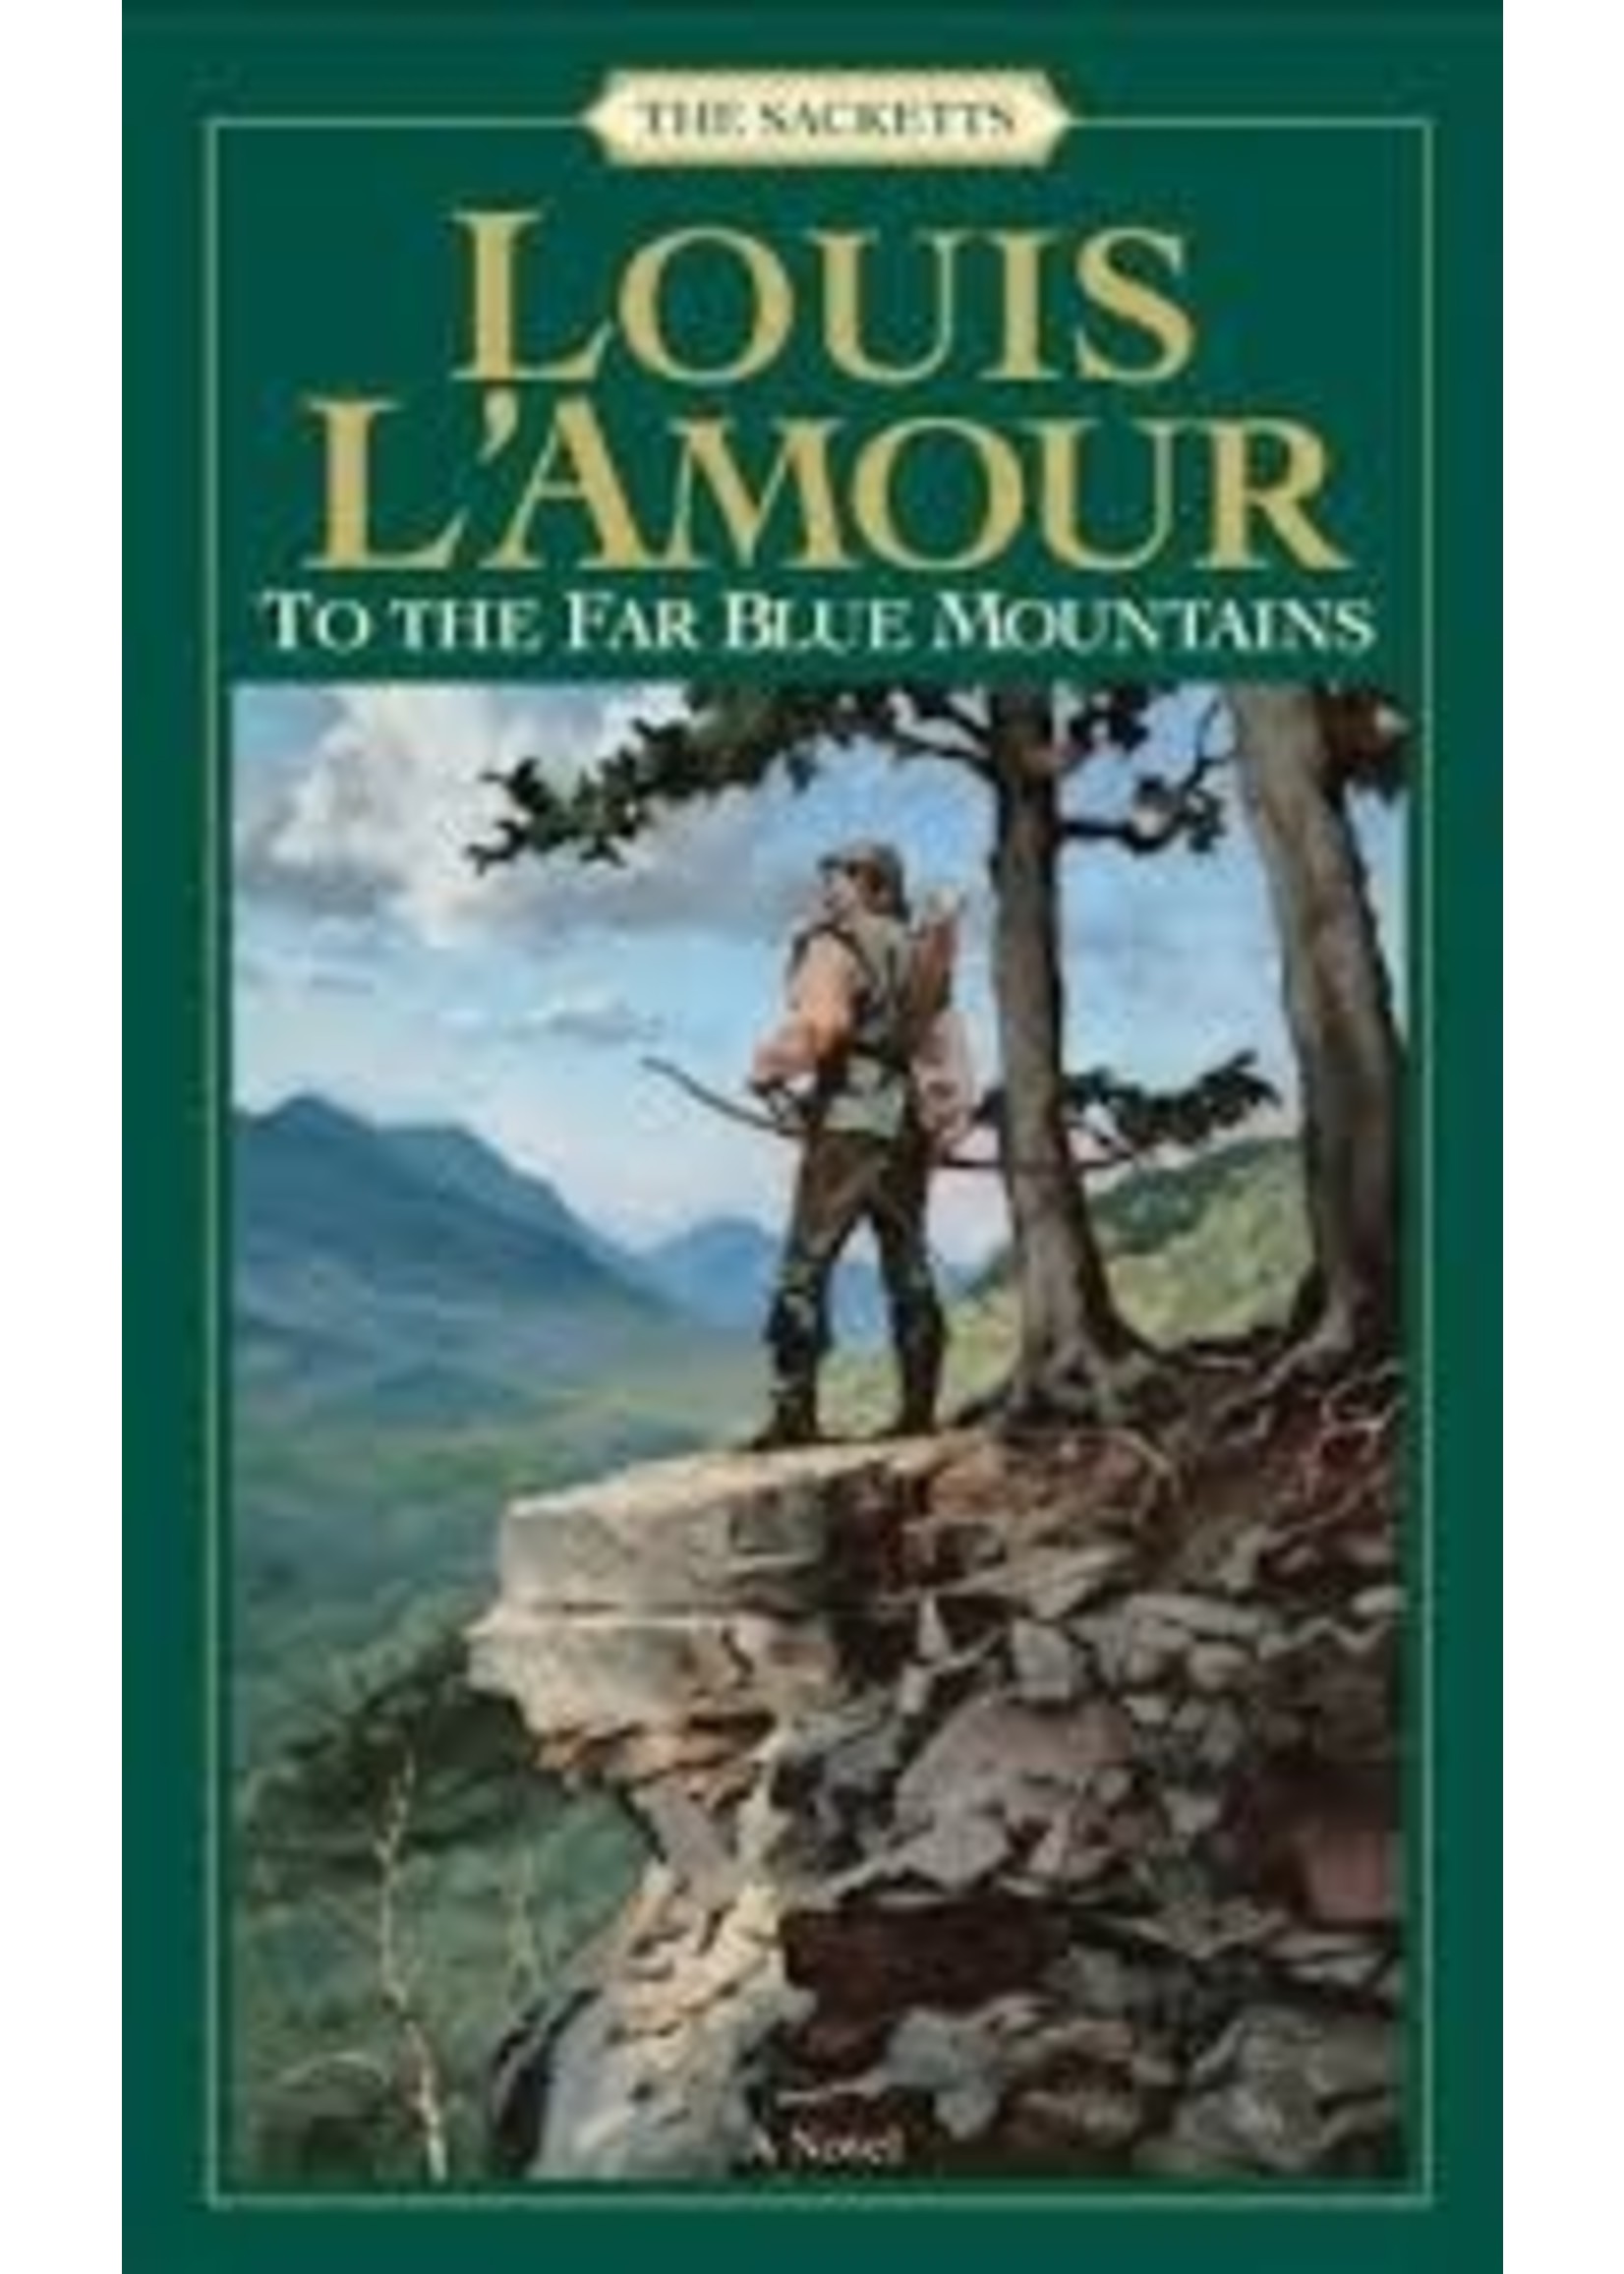 To the Far Blue Mountains (The Sacketts #2) by Louis L'Amour